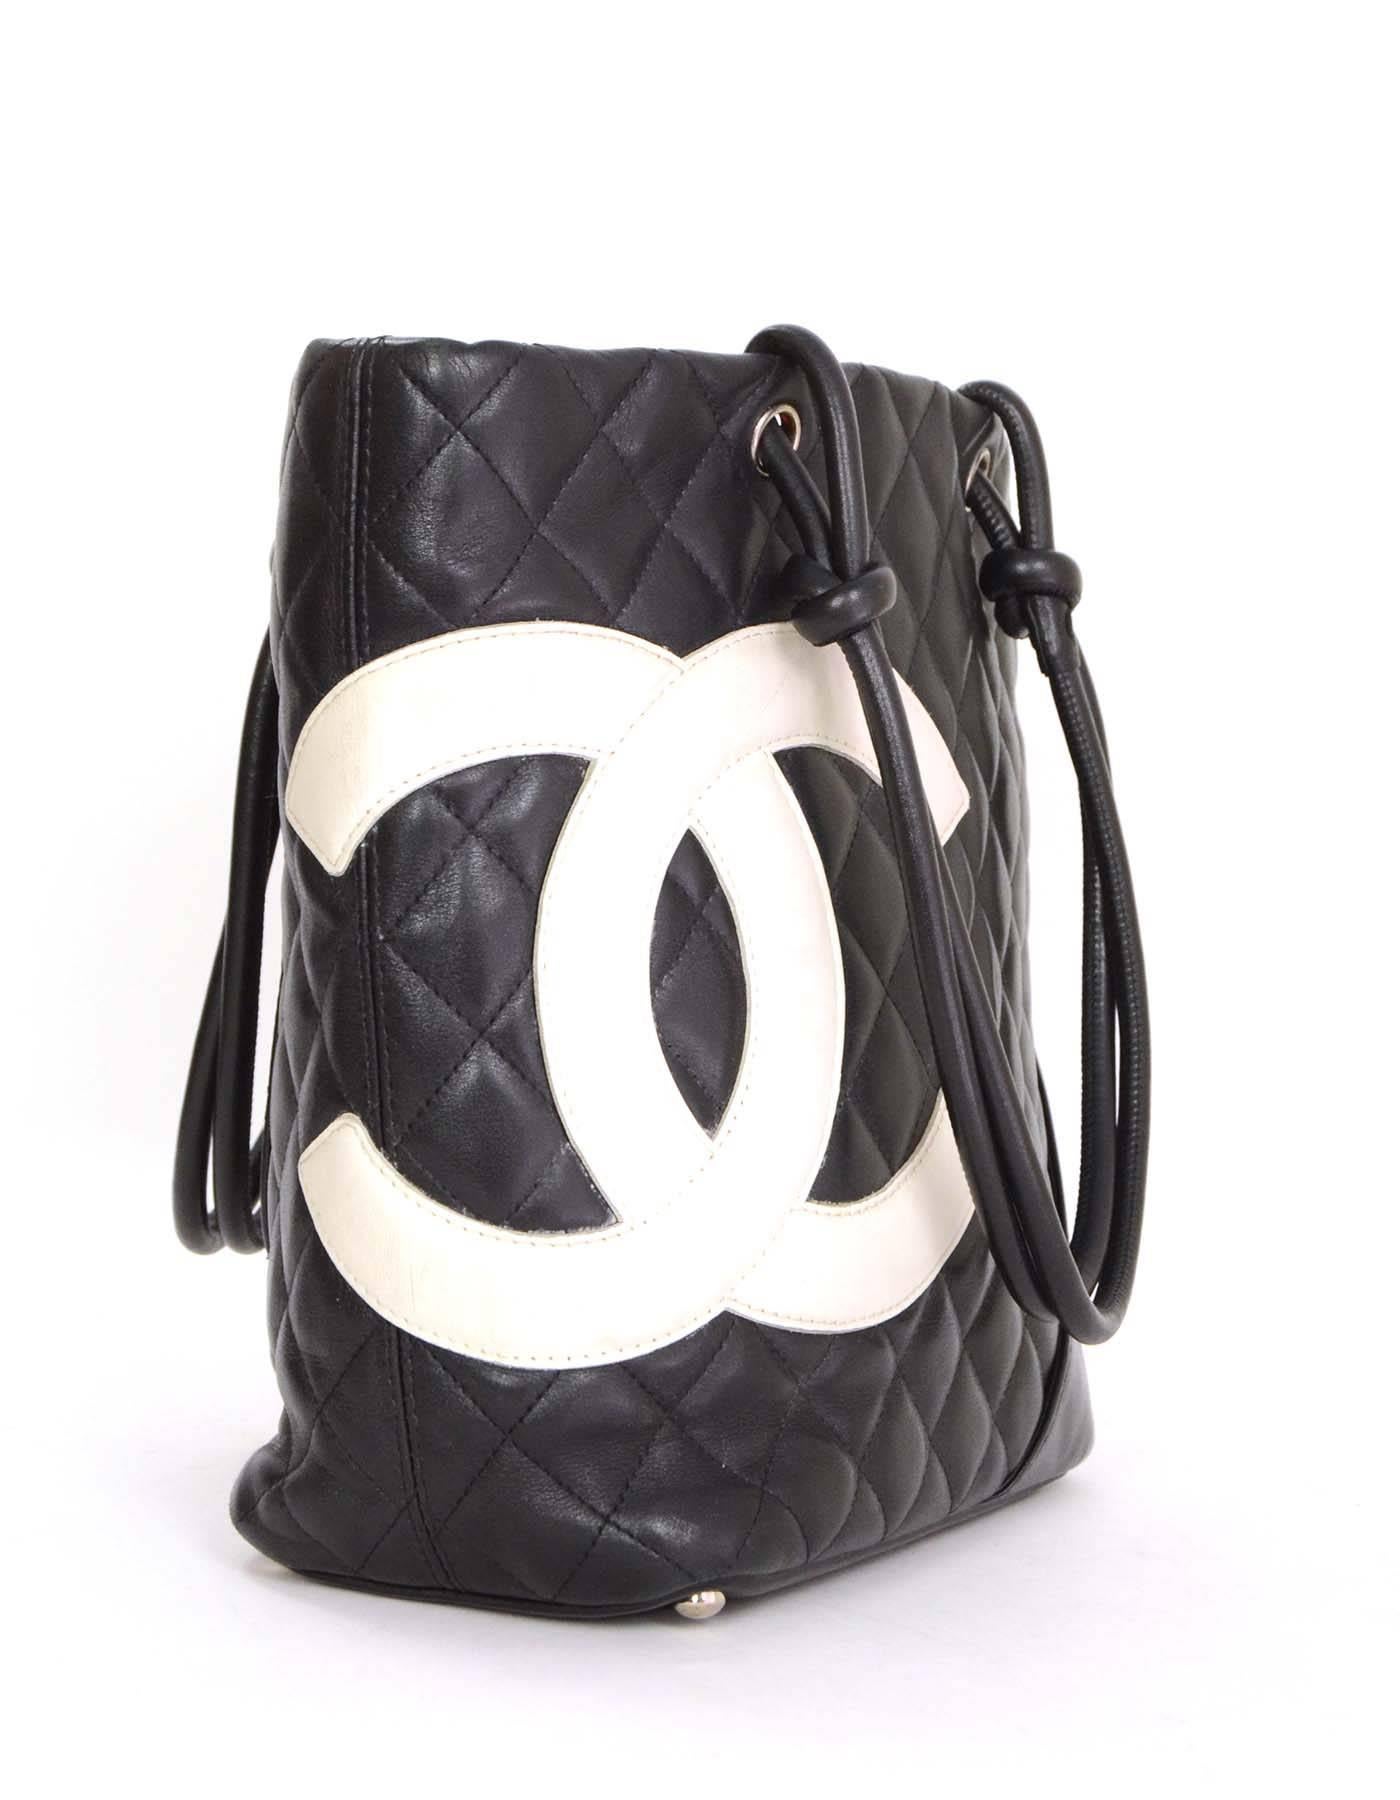 Chanel Black & White Leather Cambon Tote
Features large white CC stitched on front corner of bag
Made in: Italy
Year of Production: 2005
Color: Black and white
Hardware: Silvertone
Materials: Leather
Lining: Bright pink